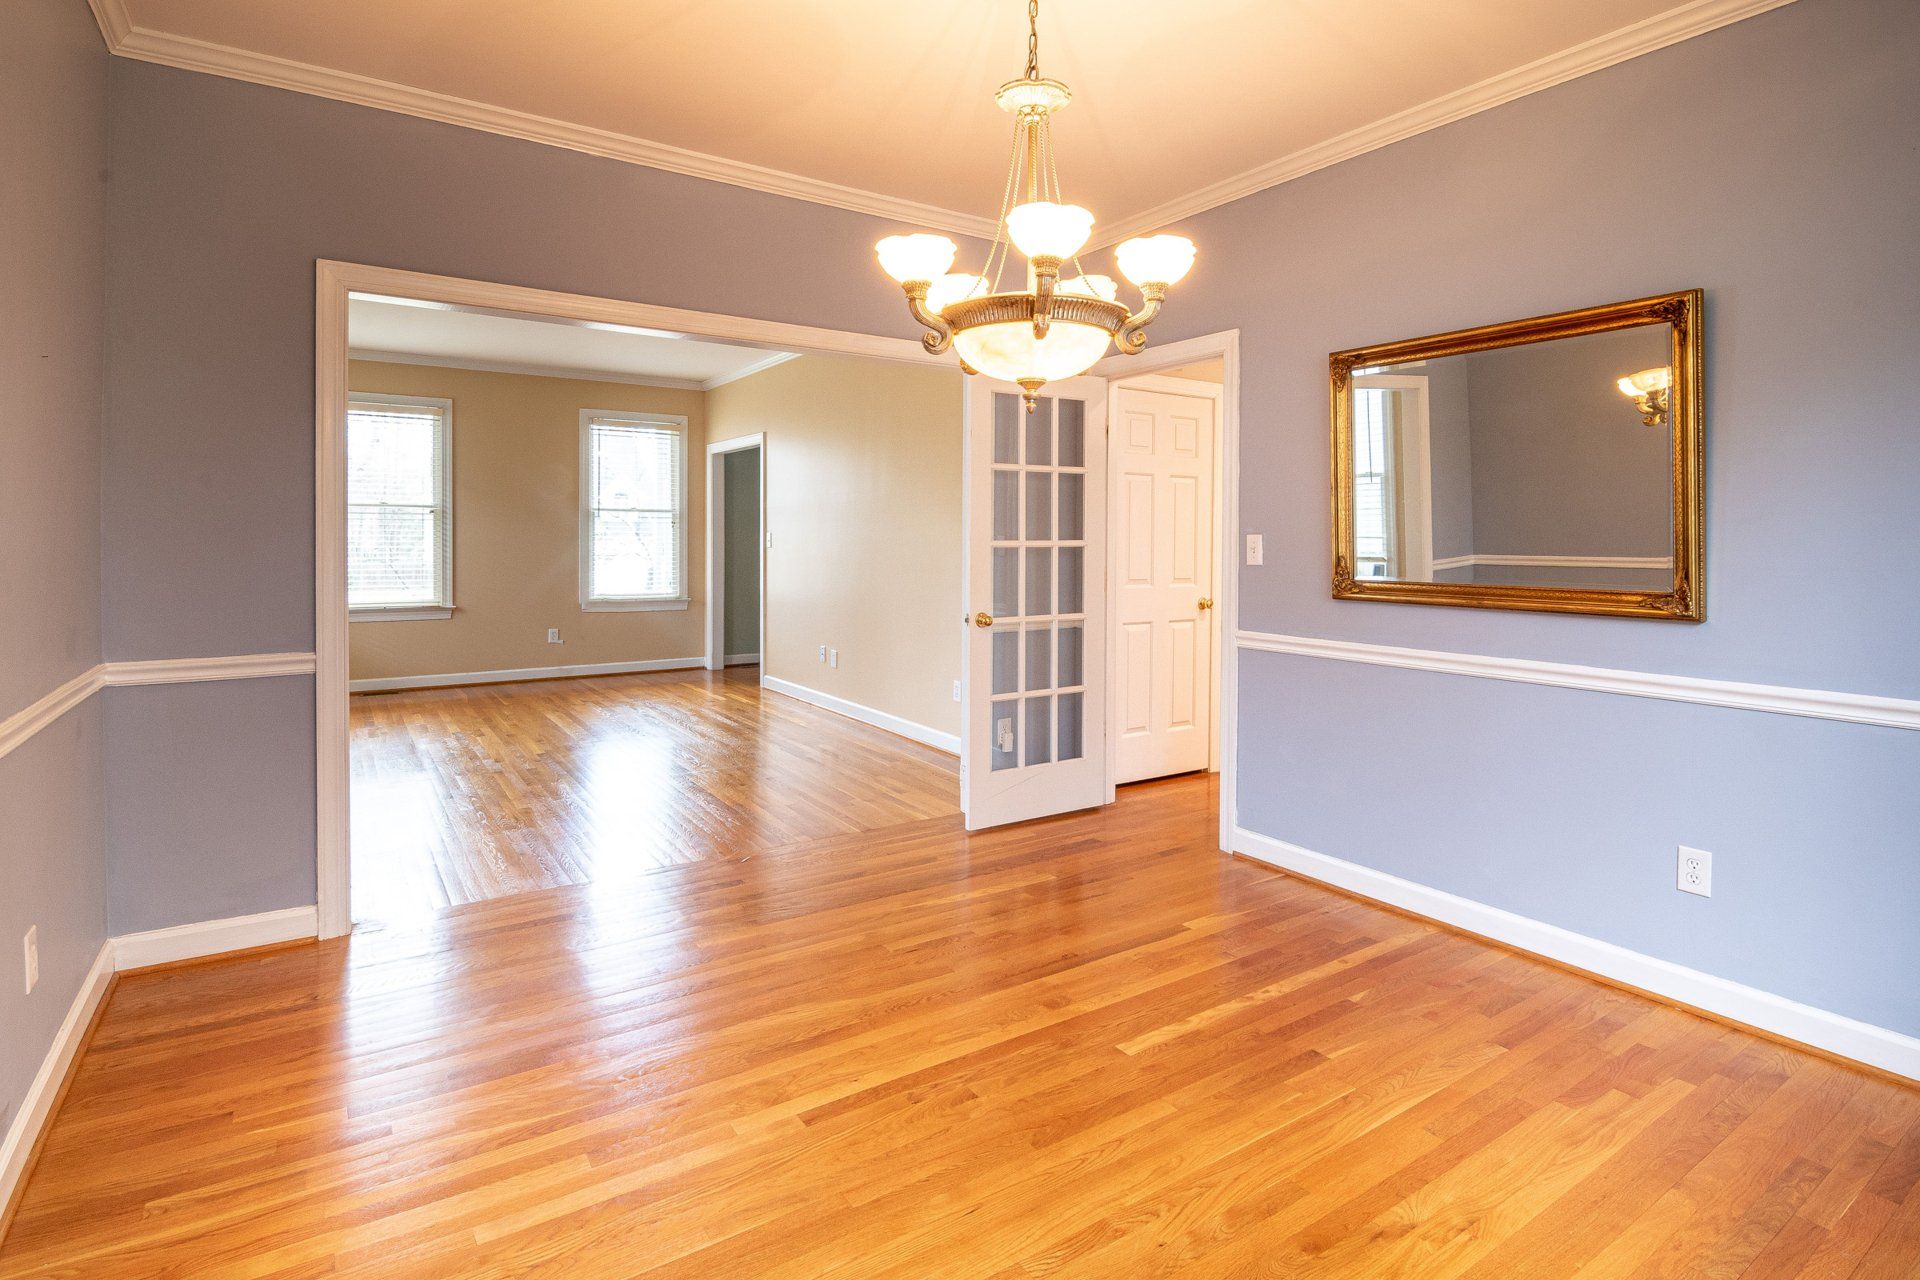 Clinton, MA home with refinished hardwood floors